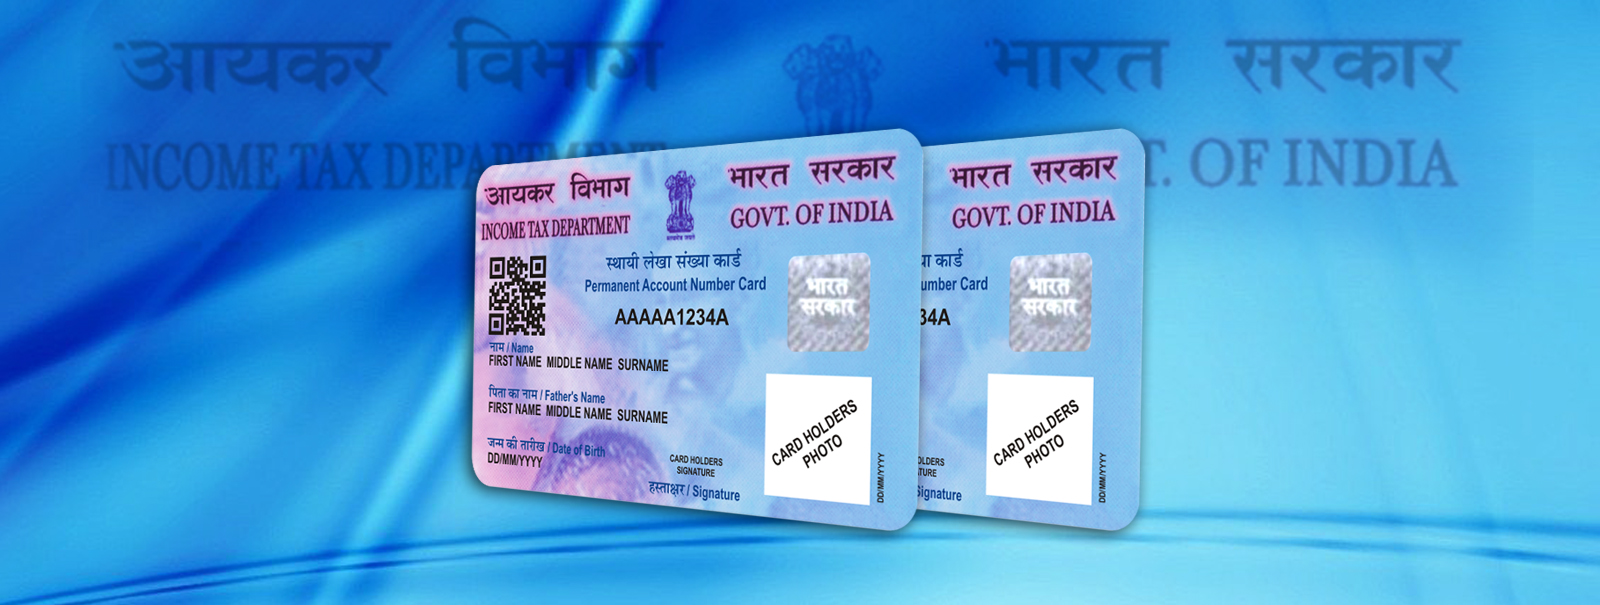 apply for Pan Card online